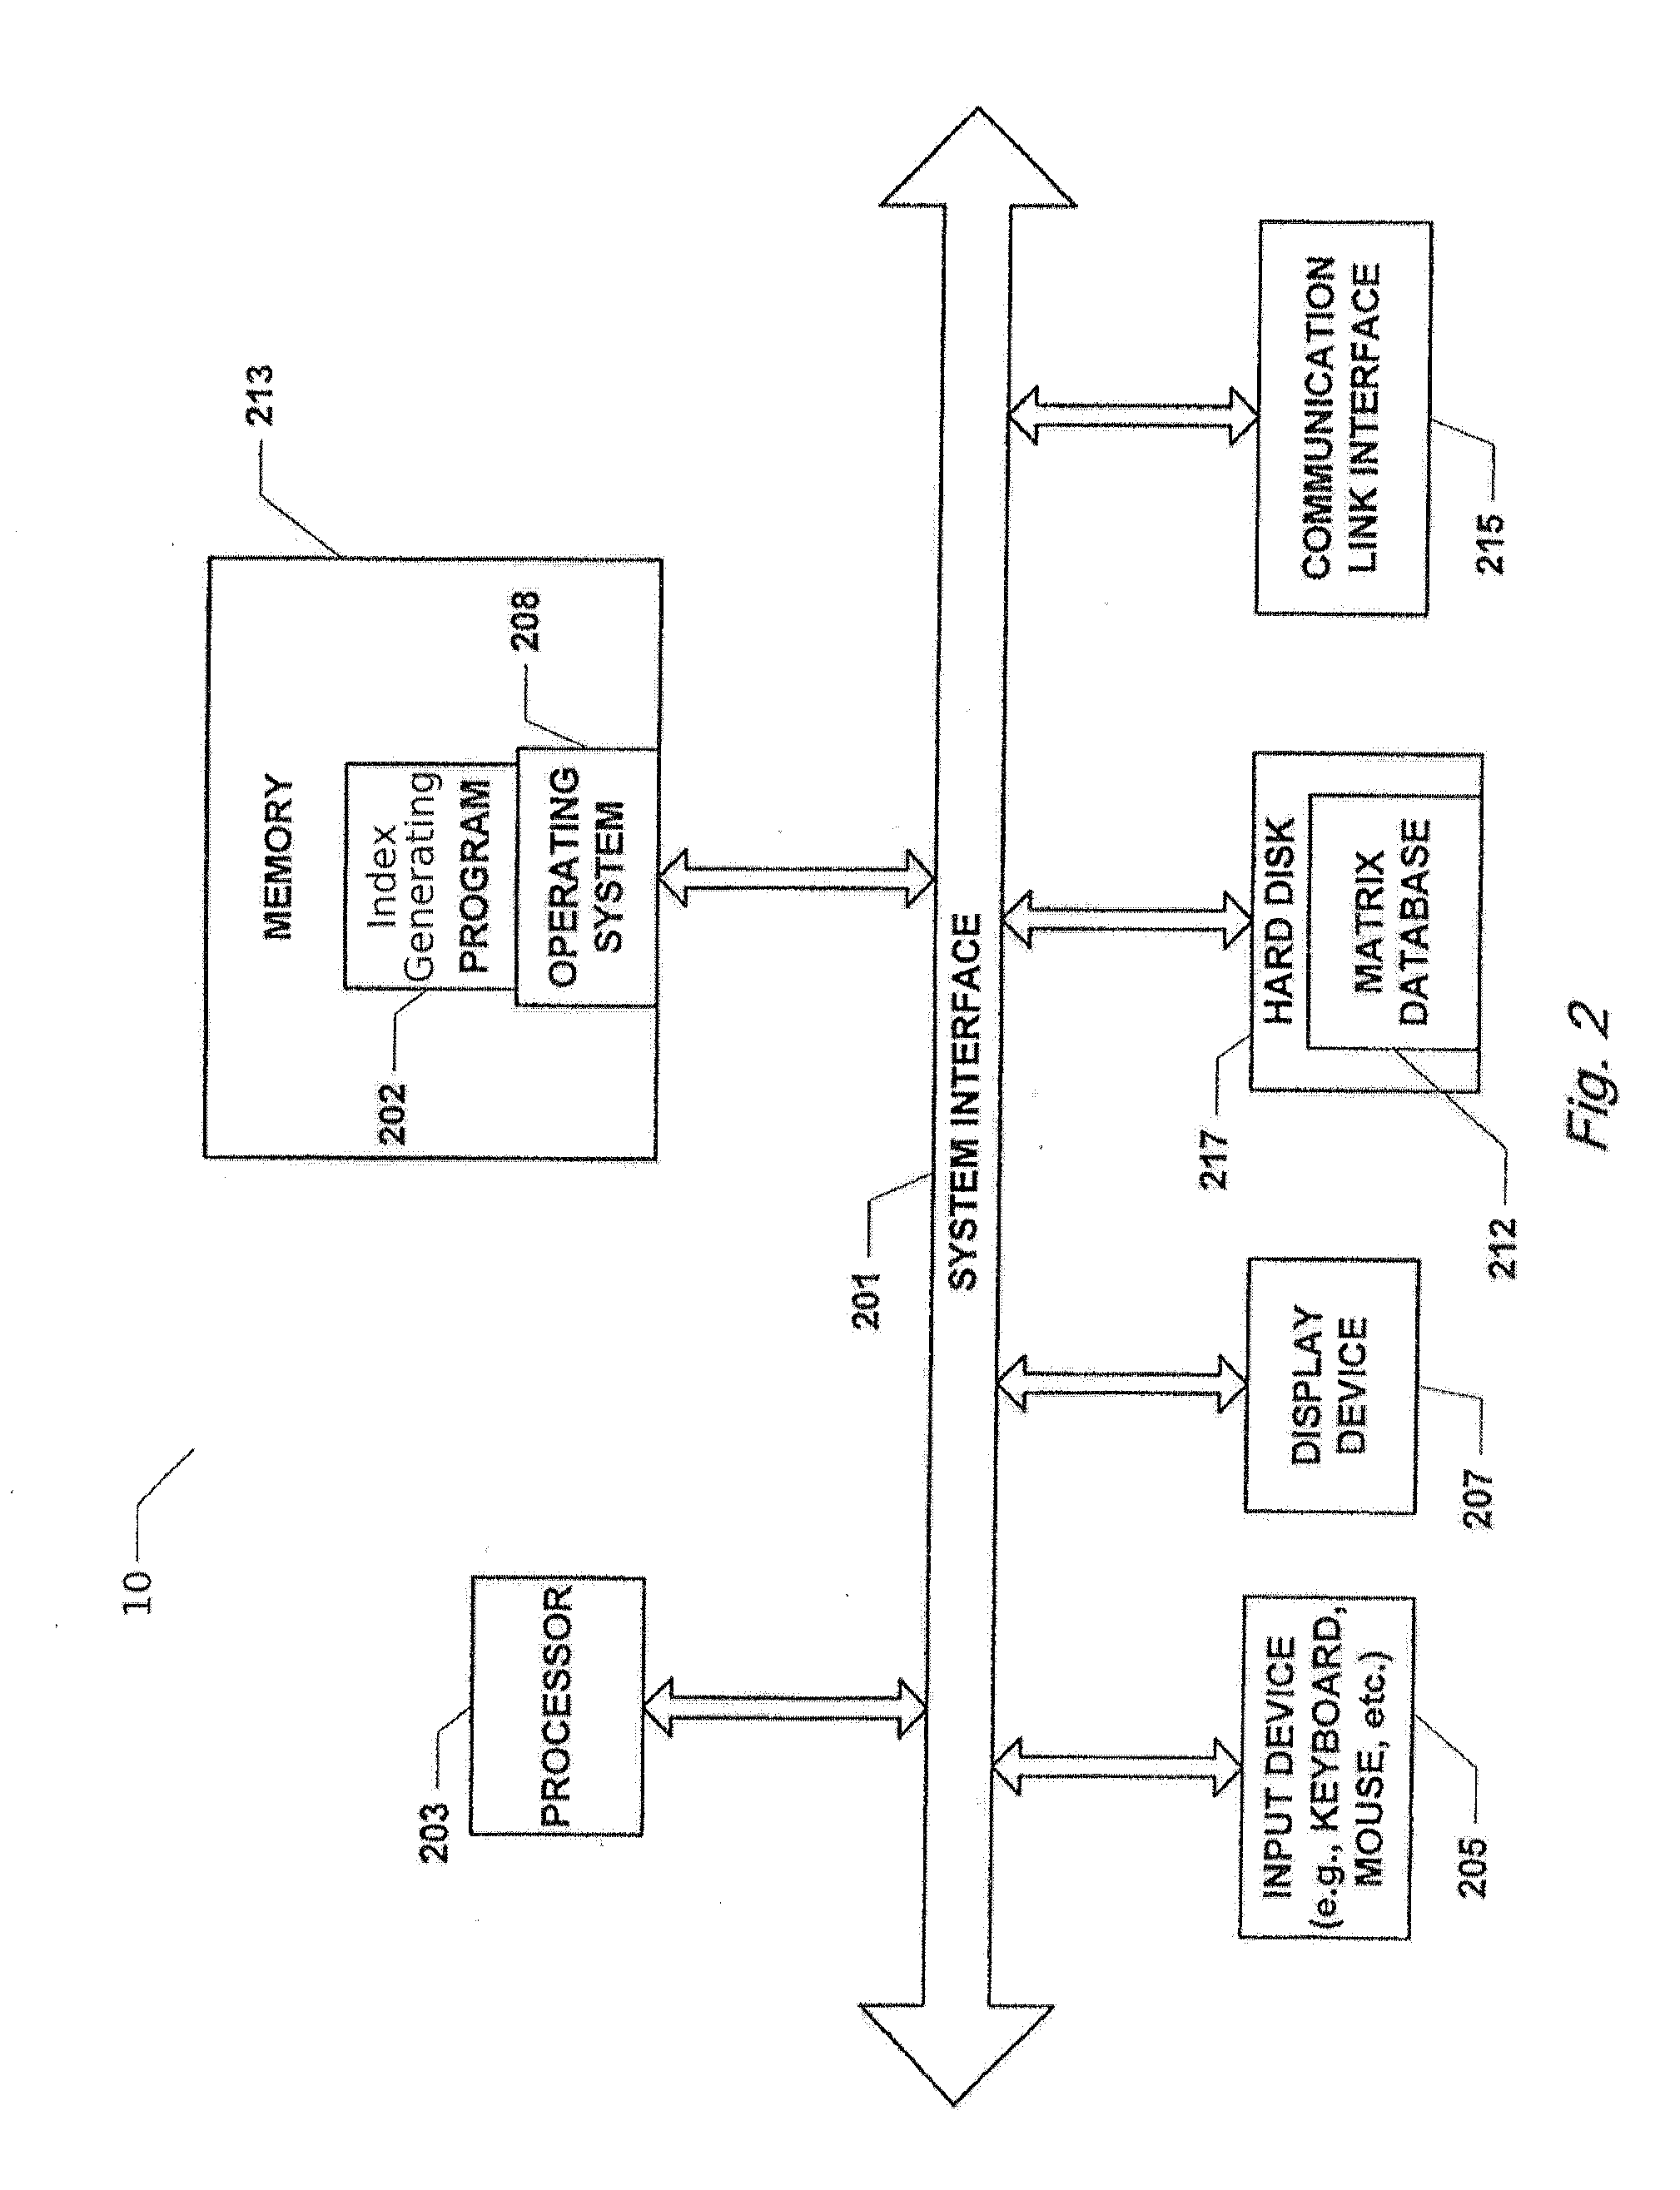 System and Method for Predicting Tornado Activity